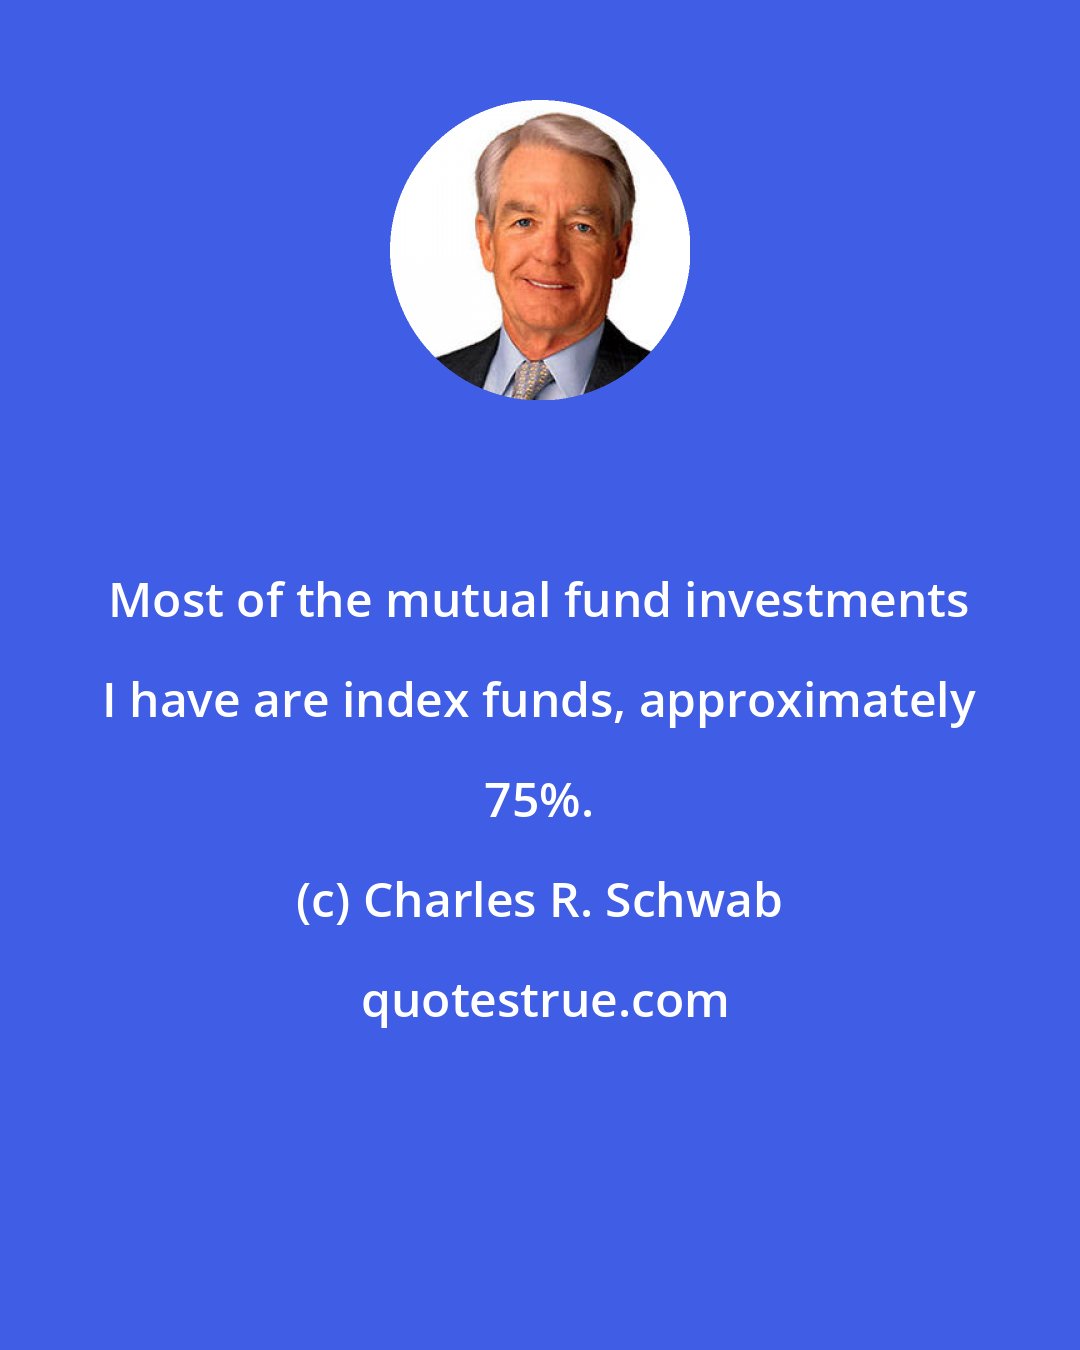 Charles R. Schwab: Most of the mutual fund investments I have are index funds, approximately 75%.